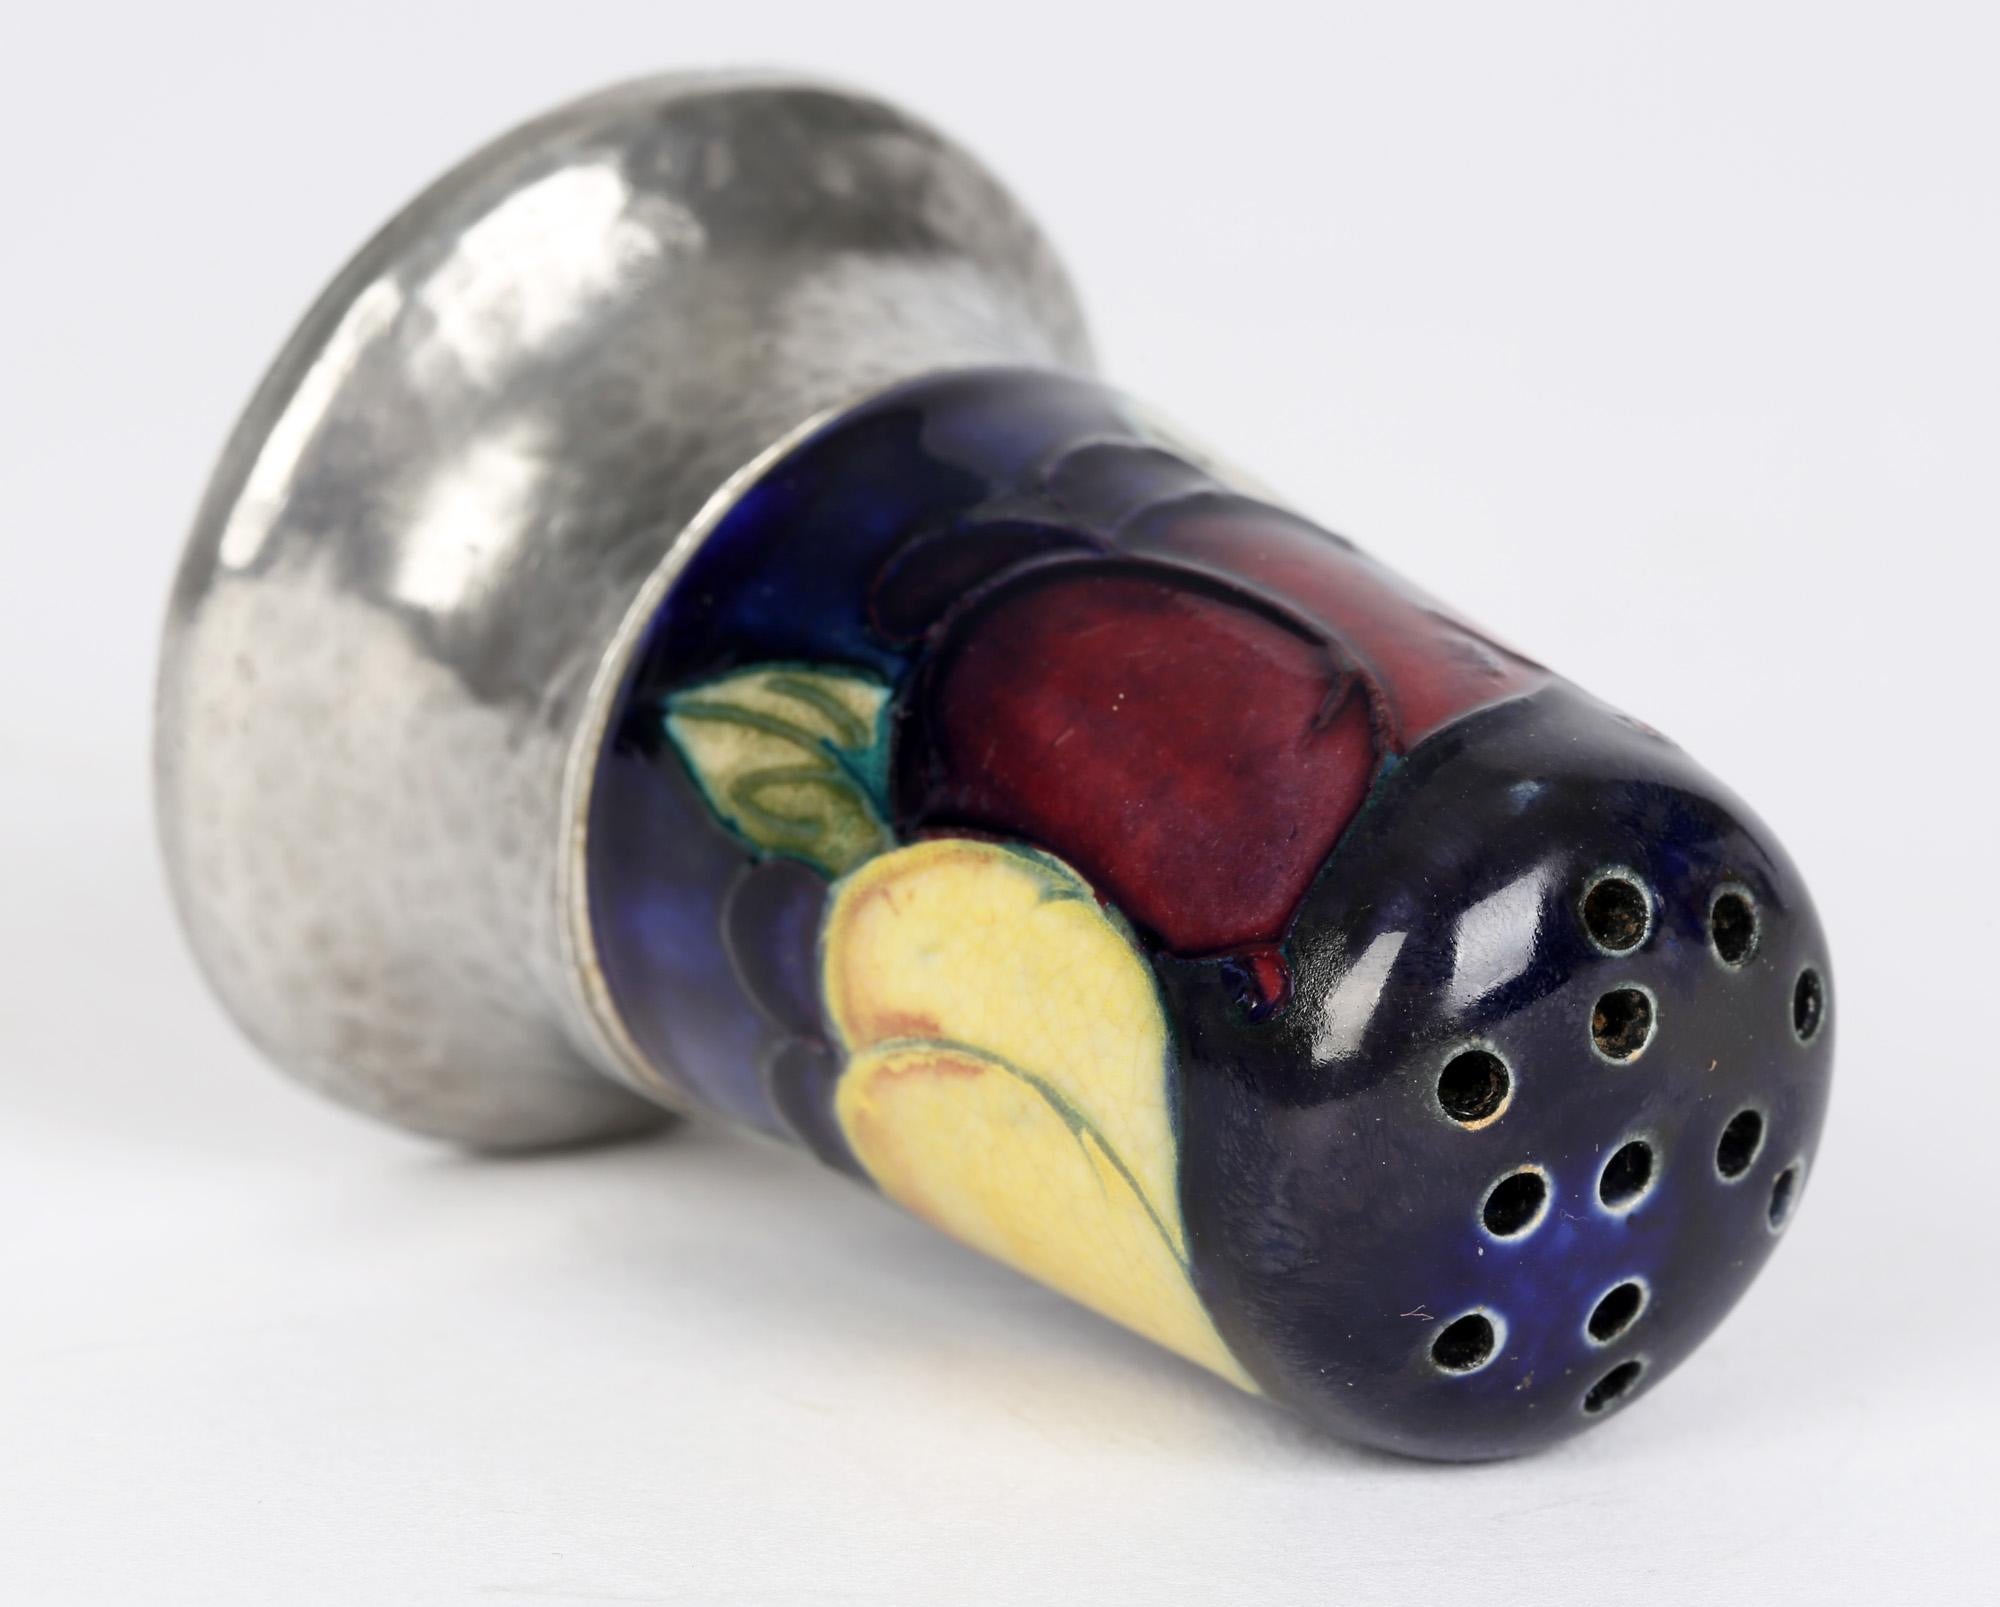 A scarce and unusual Moorcroft Wisteria pattern pepperette with a Tudric planished pewter base dating from around 1920. The pepperette body is of simple thimble shape with tube lined fruit like designs hand painted in tones of red, blue, yellow and